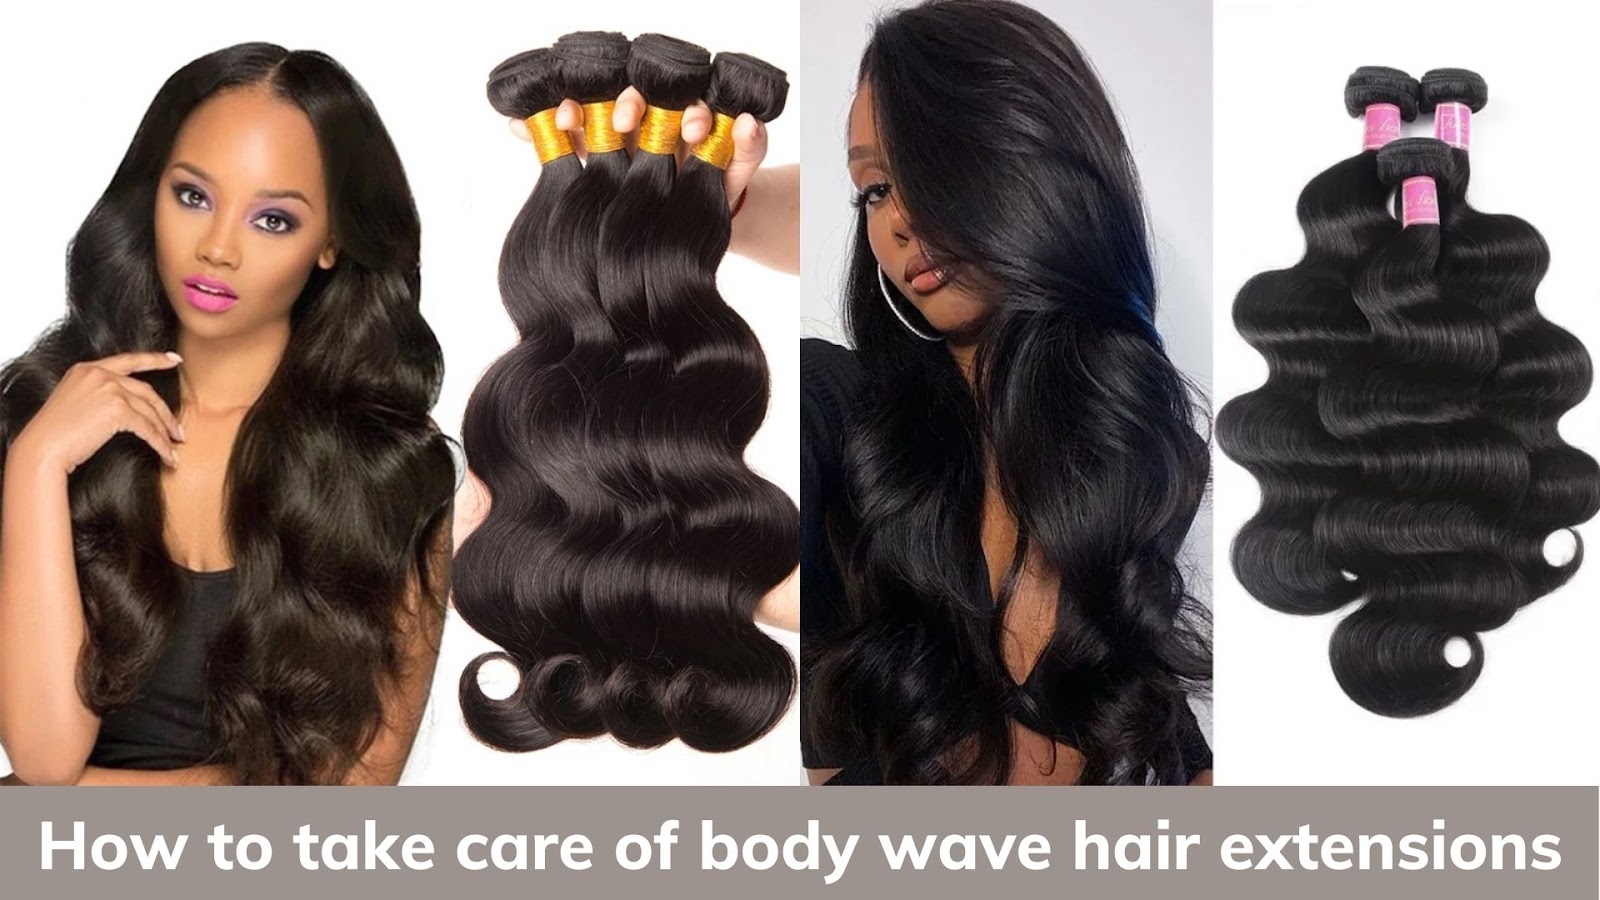 How to take care of body wave hair extensions